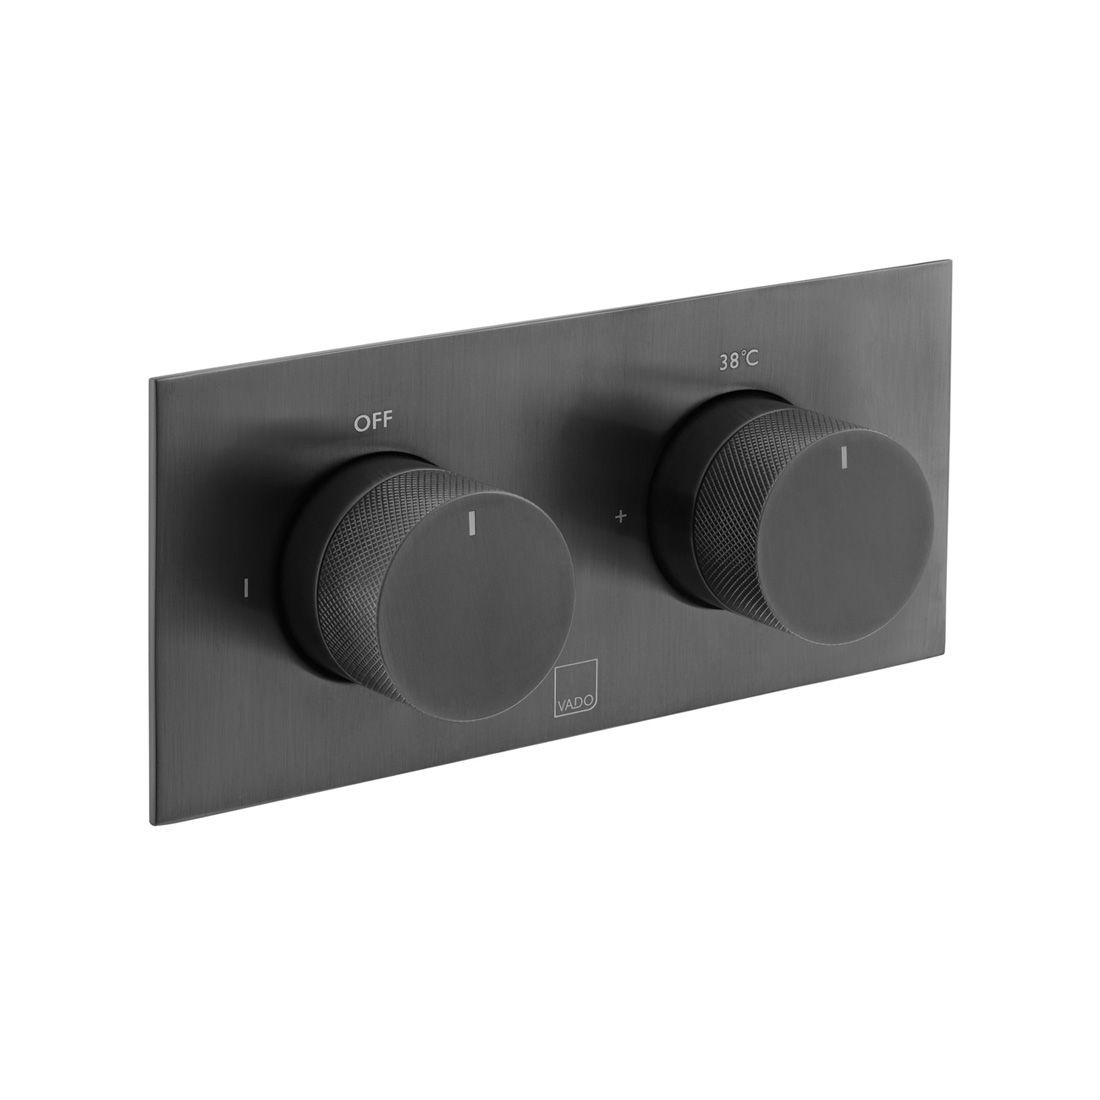 Individual by Vado Thermostatic Shower Valve 2 Outlet Horizontal with Knurled Accents Brushed Black [IND-T148/2-H-BLKK]